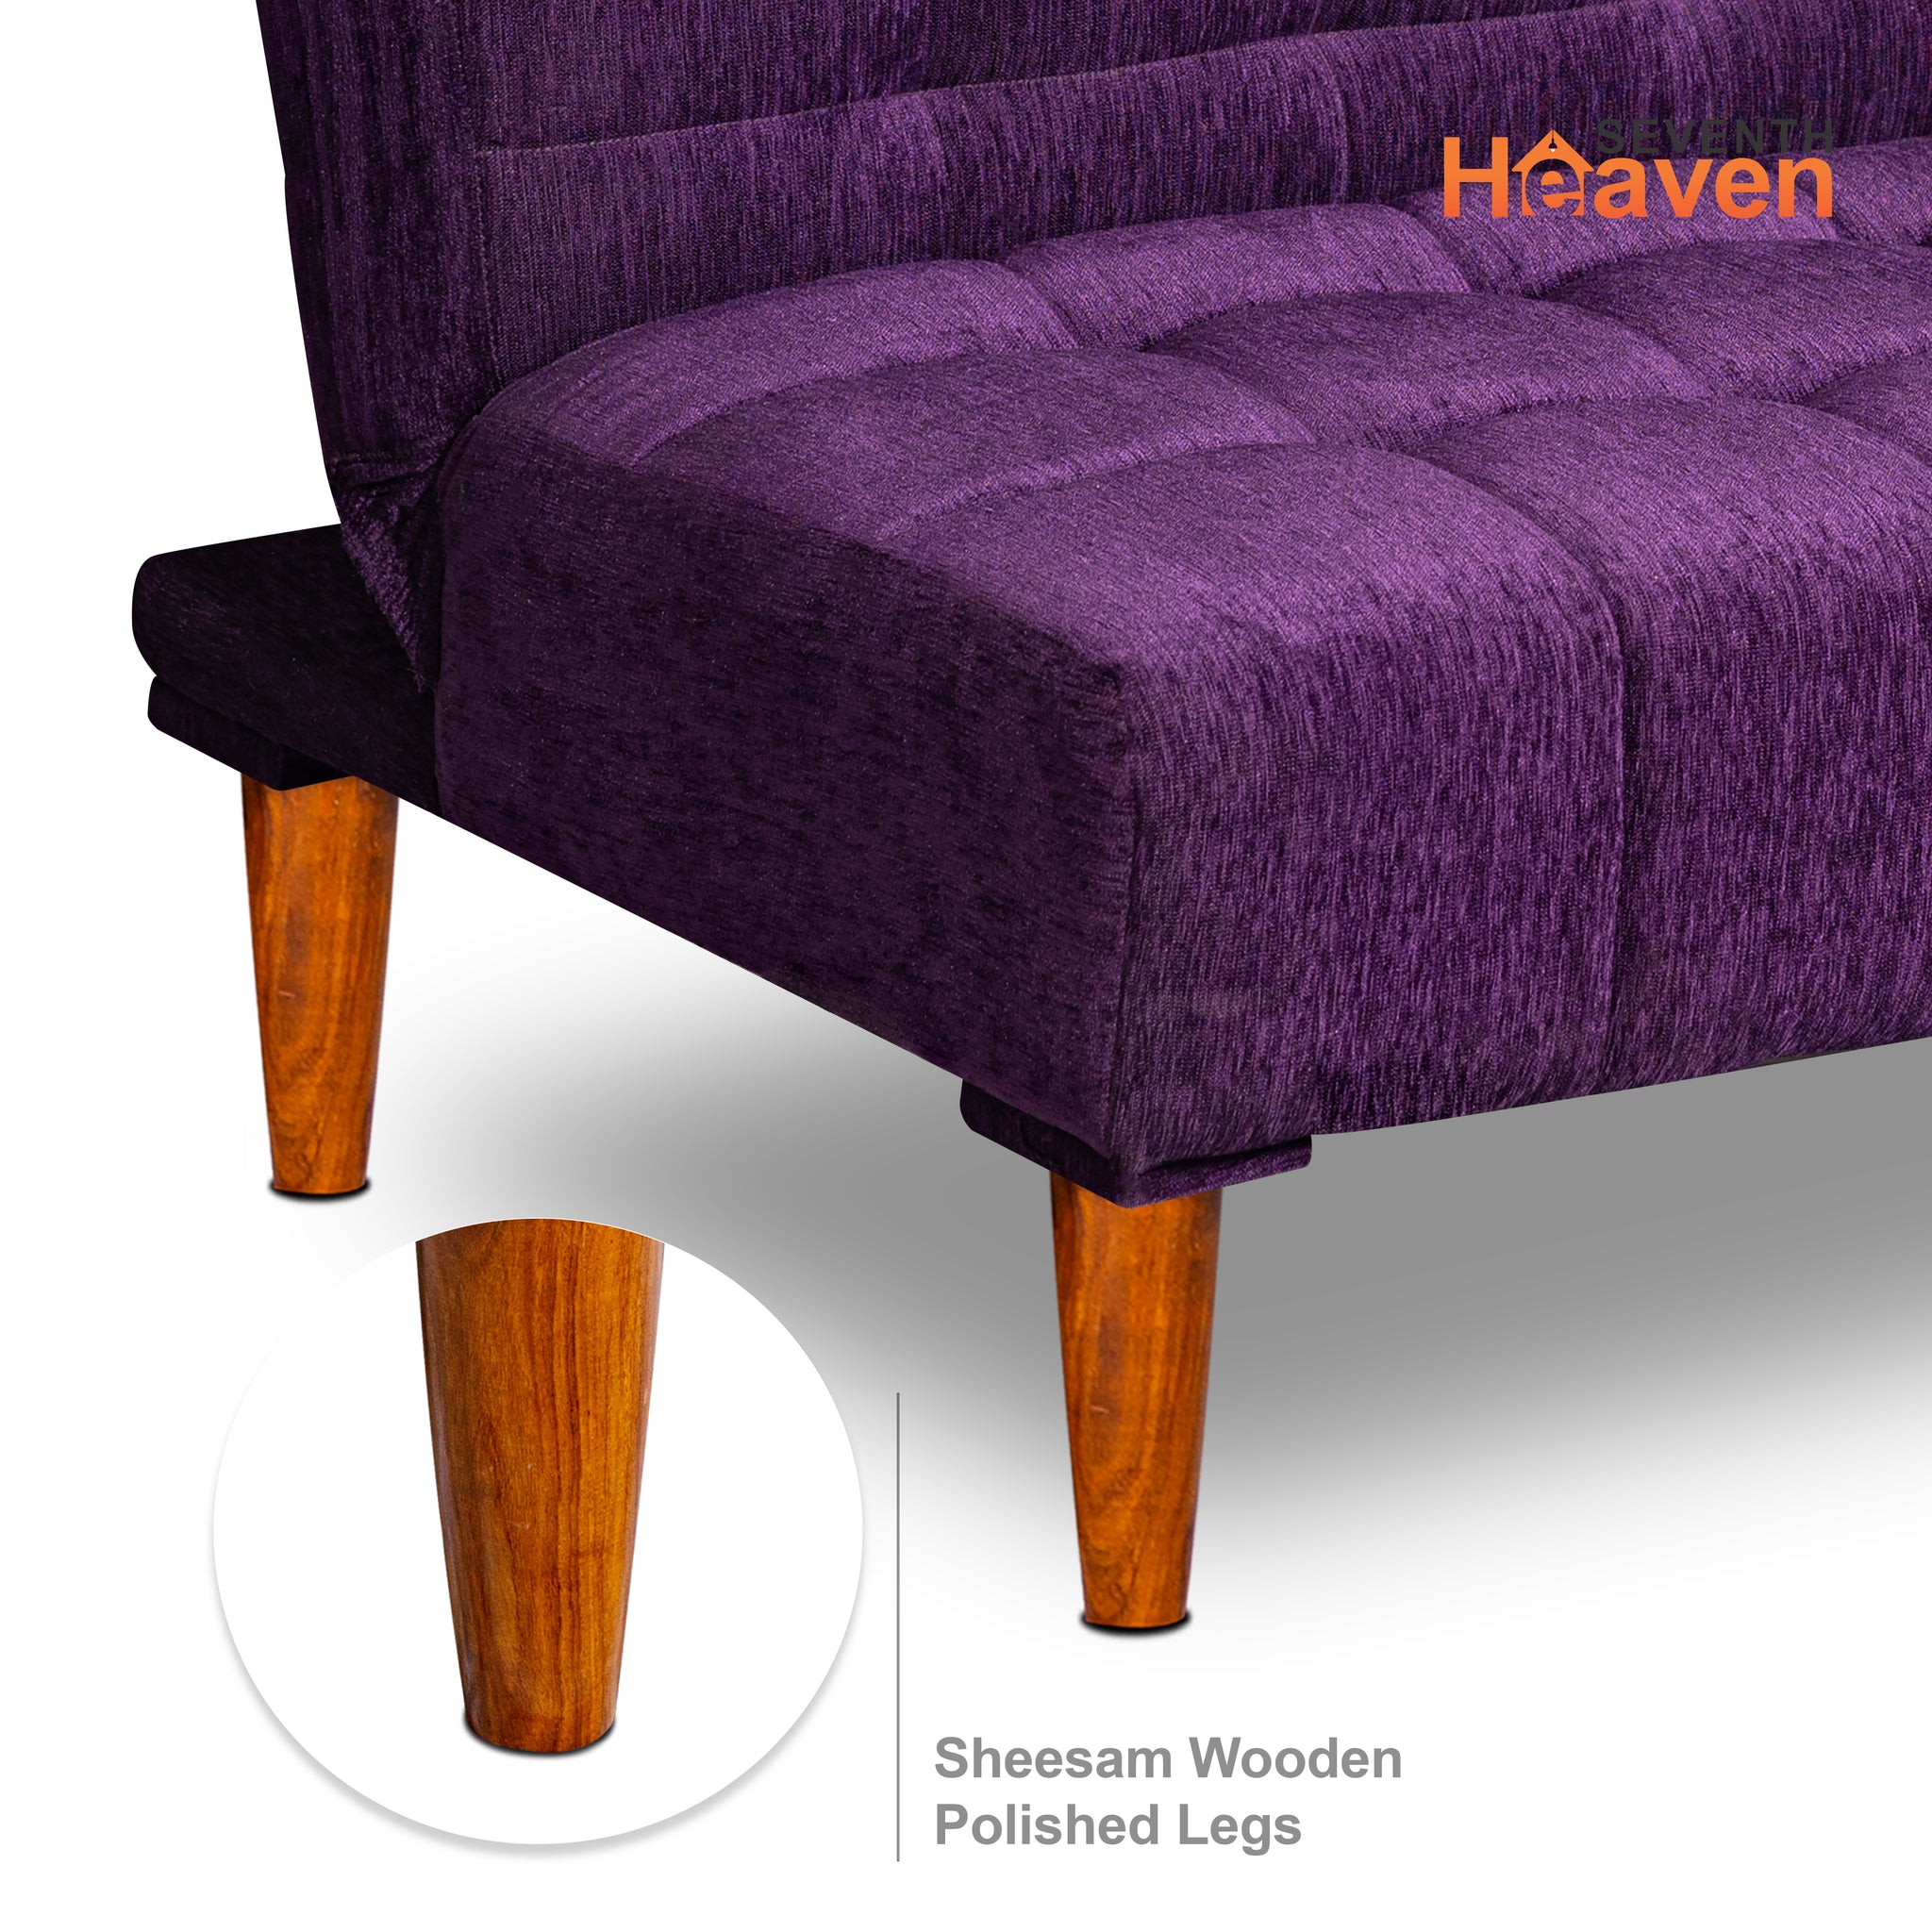 Seventh Heaven Florida Neo 4 Seater Wooden Sofa Cum Bed Modern & Elegant Smart Furniture Range for luxurious homes, living rooms and offices. Use as a sofa, lounger or bed. Perfect for guests. Molphino fabric with sheesham polished wooden legs. Purple colour.